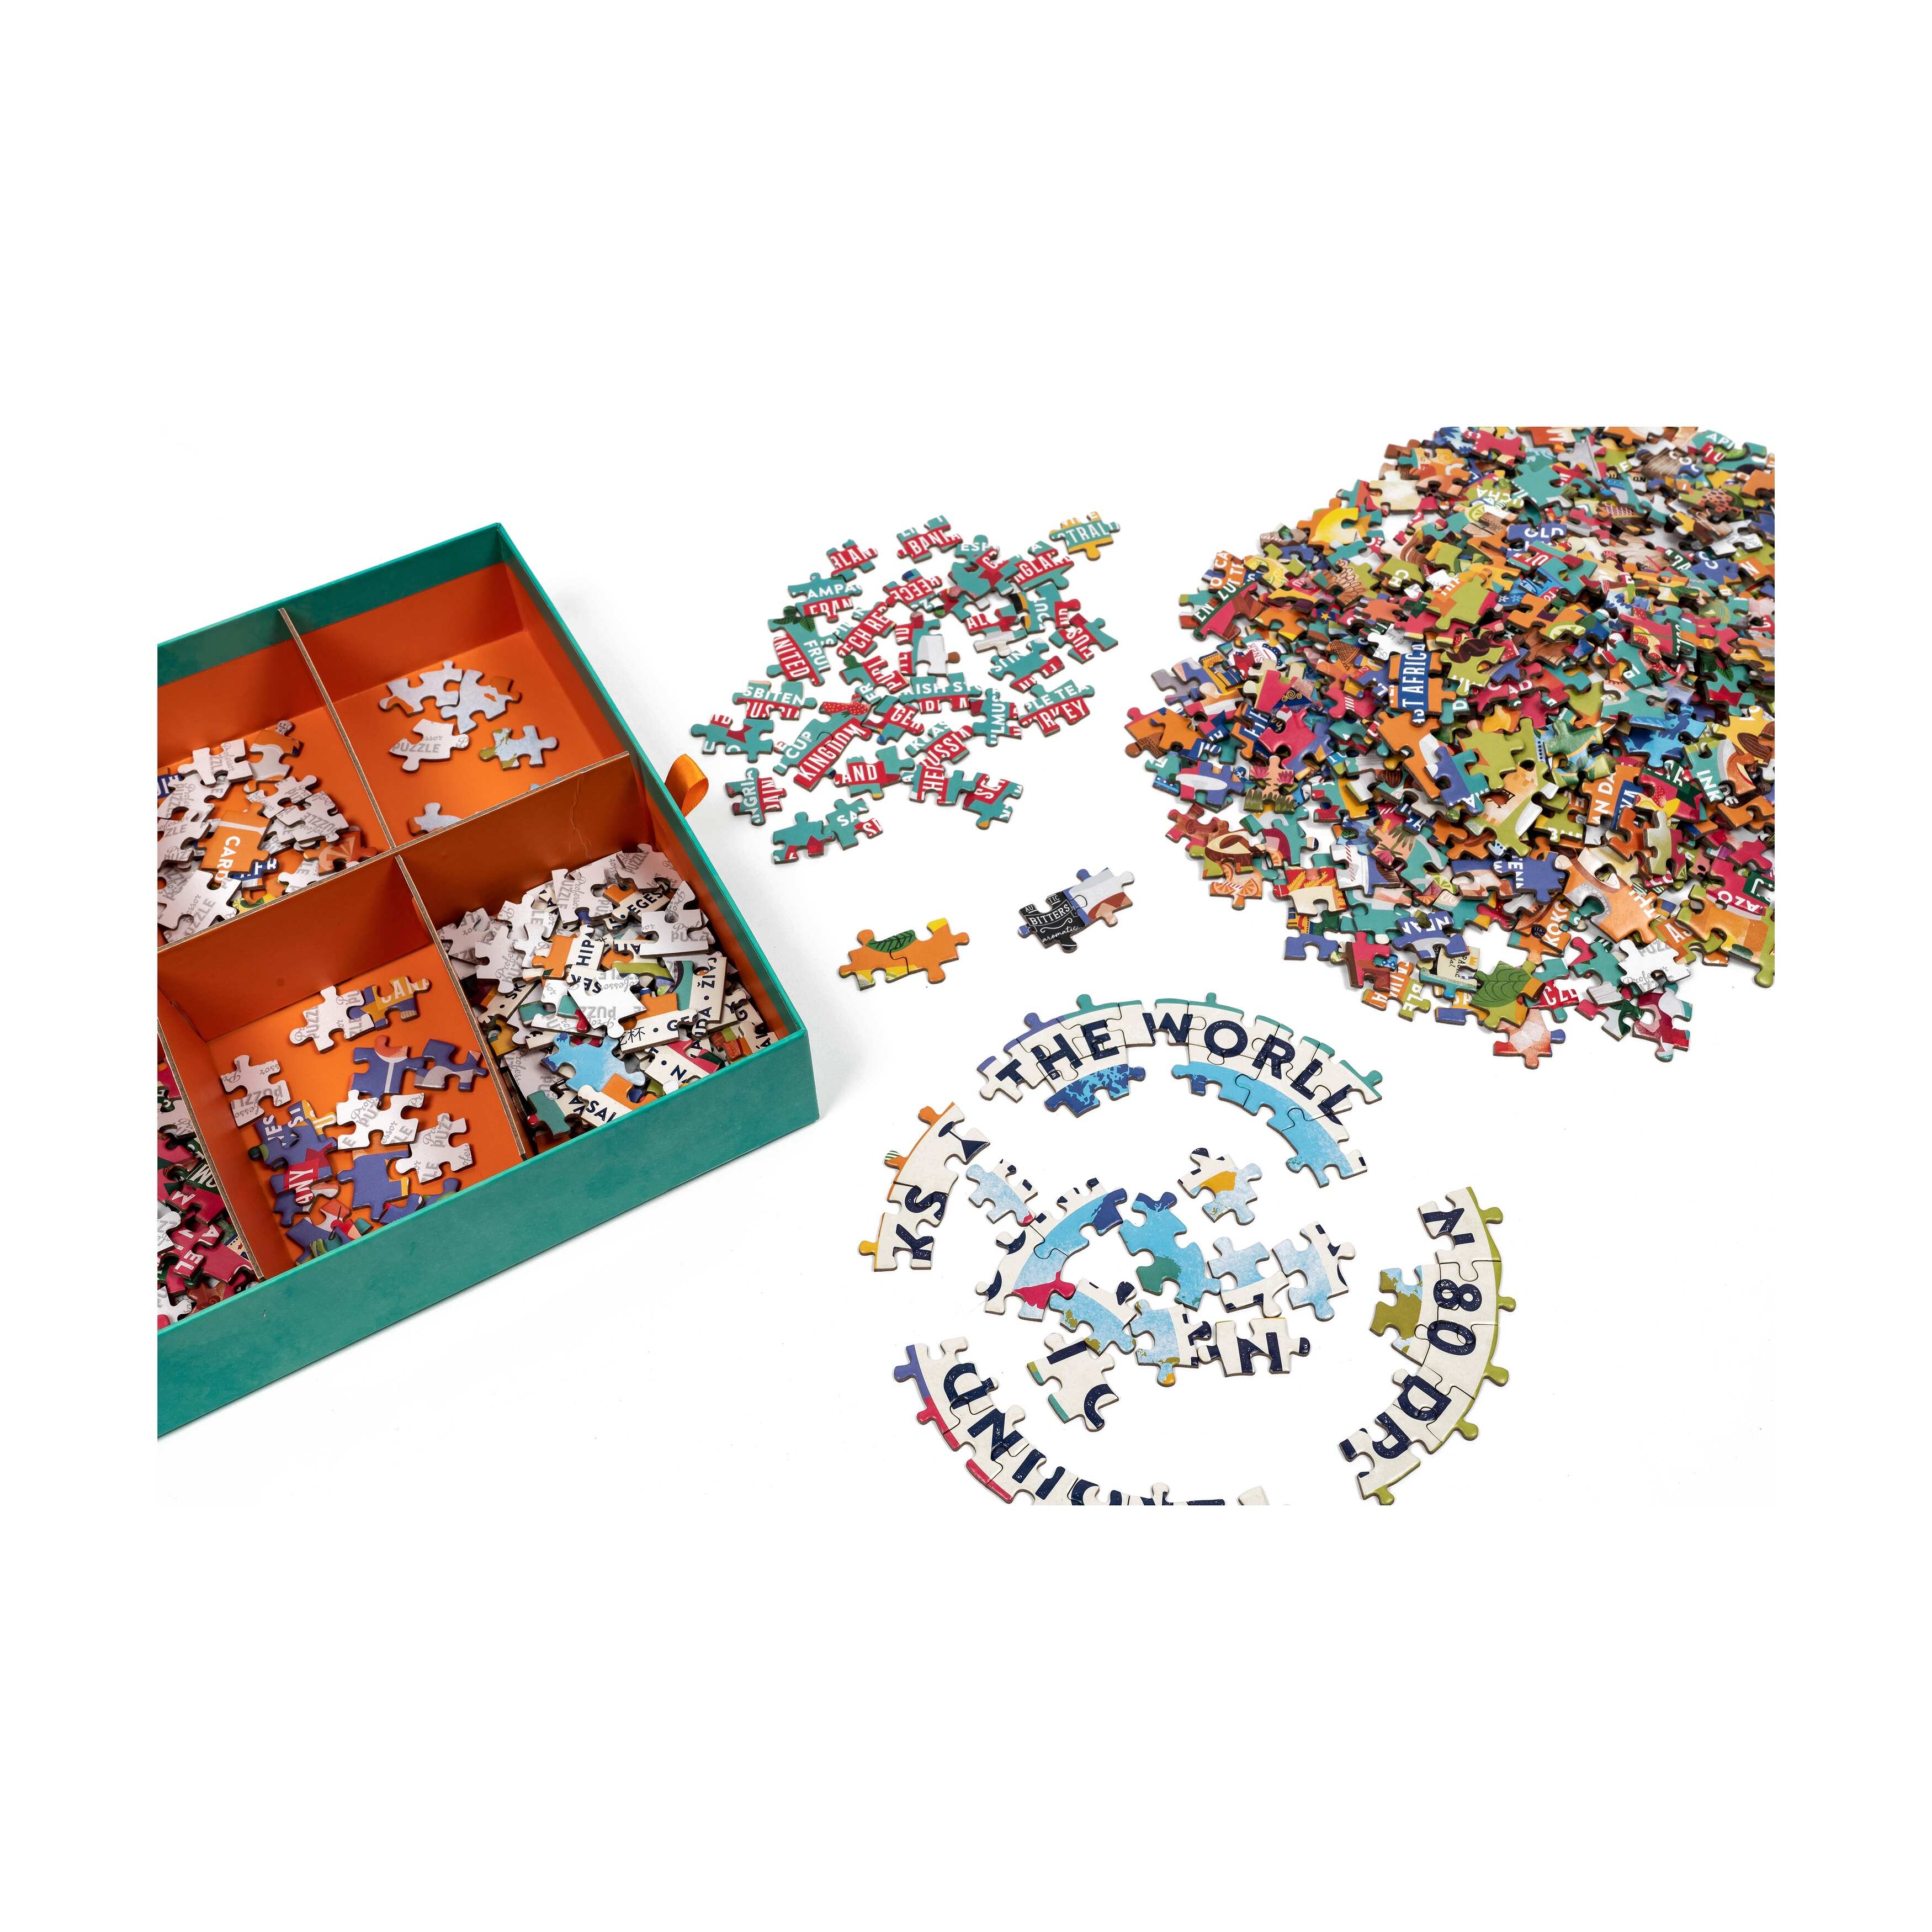 Around the World in 80 Drinks Circular Jigsaw Puzzle - 1000 Pcs - N/A